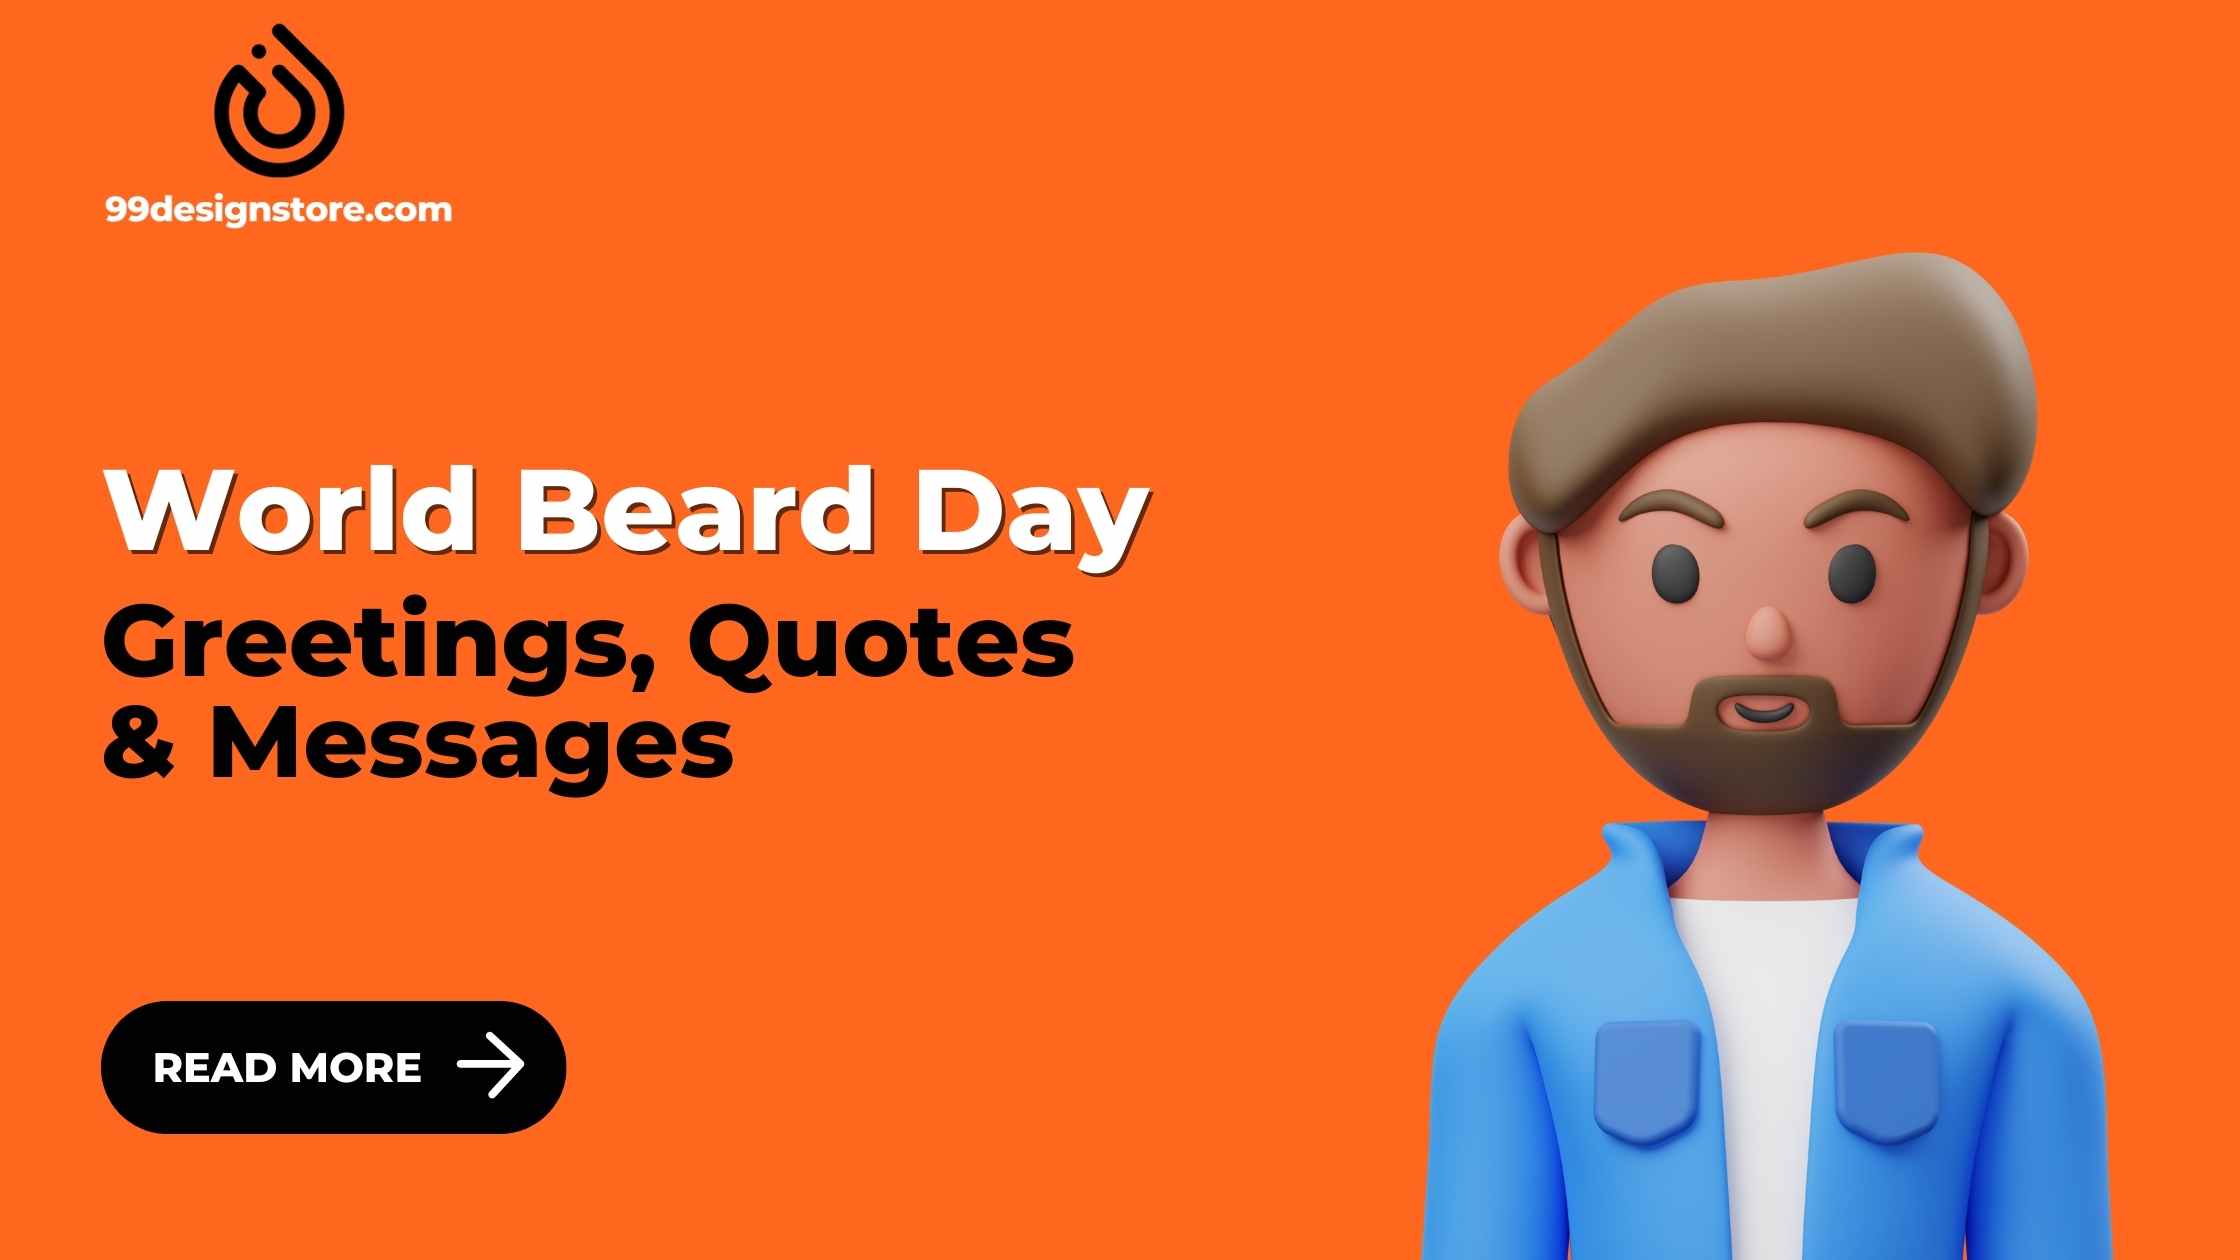 World Beard Day Greetings & Quotes